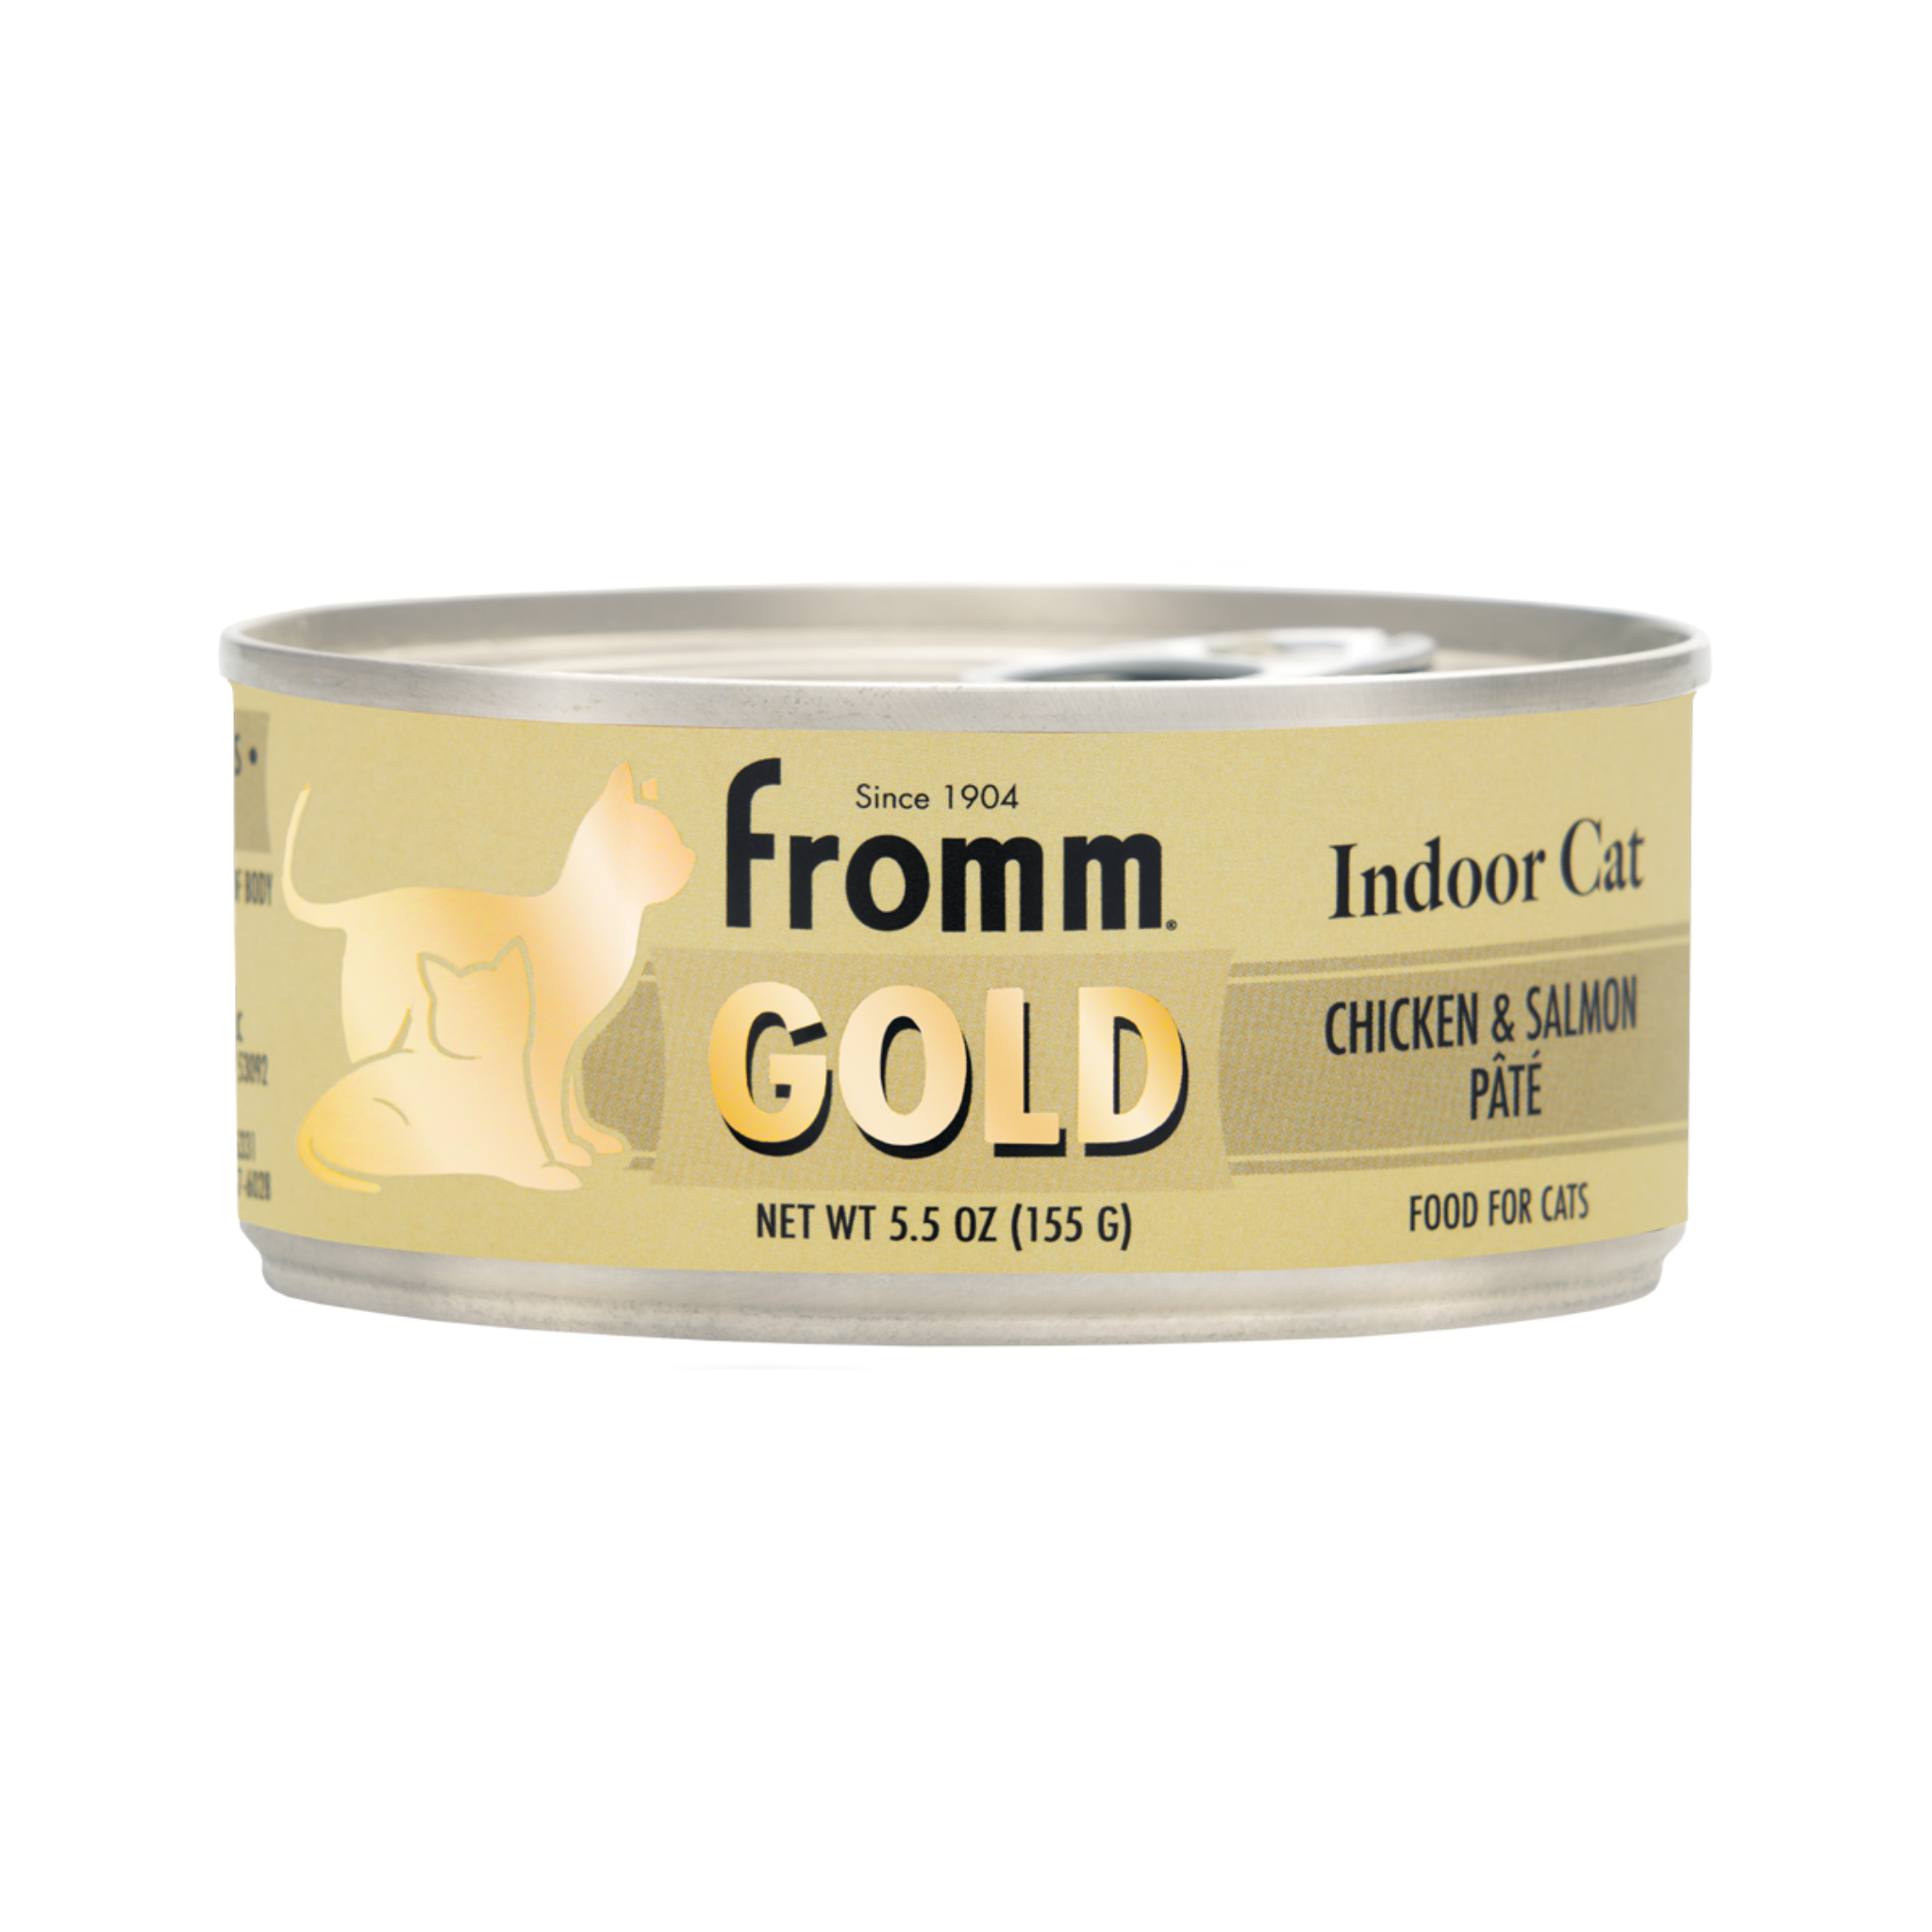 Fromm Gold Indoor Cat Chicken & Salmon Pate Cat Canned